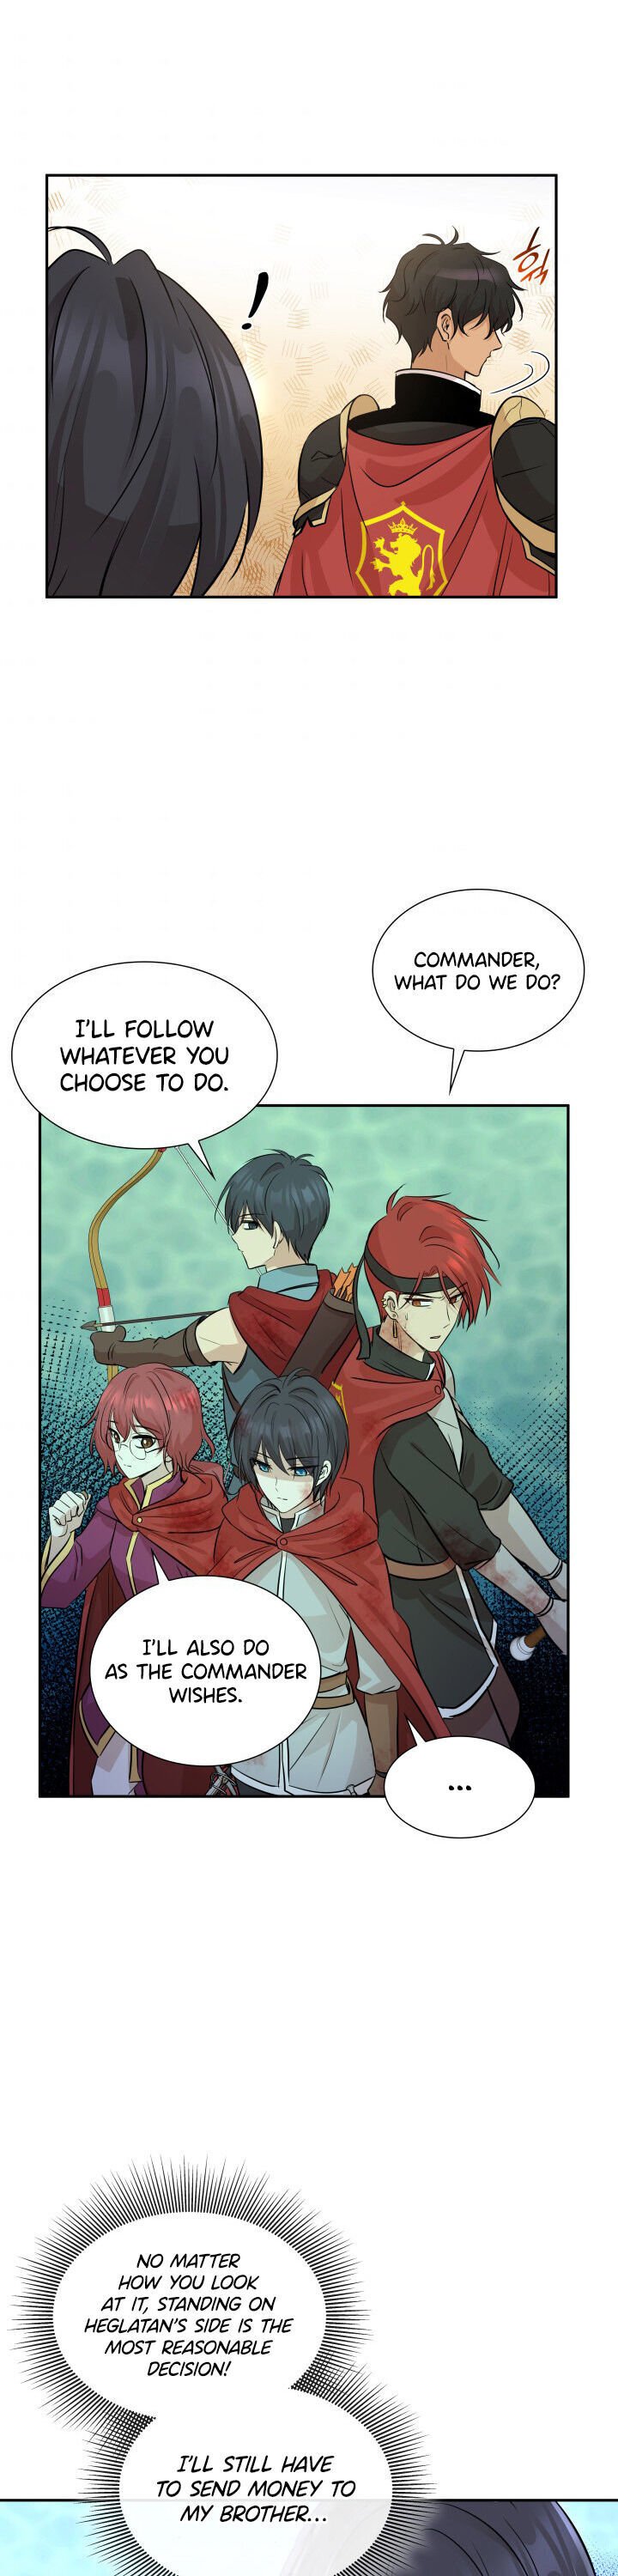 Marriage and Sword chapter 3